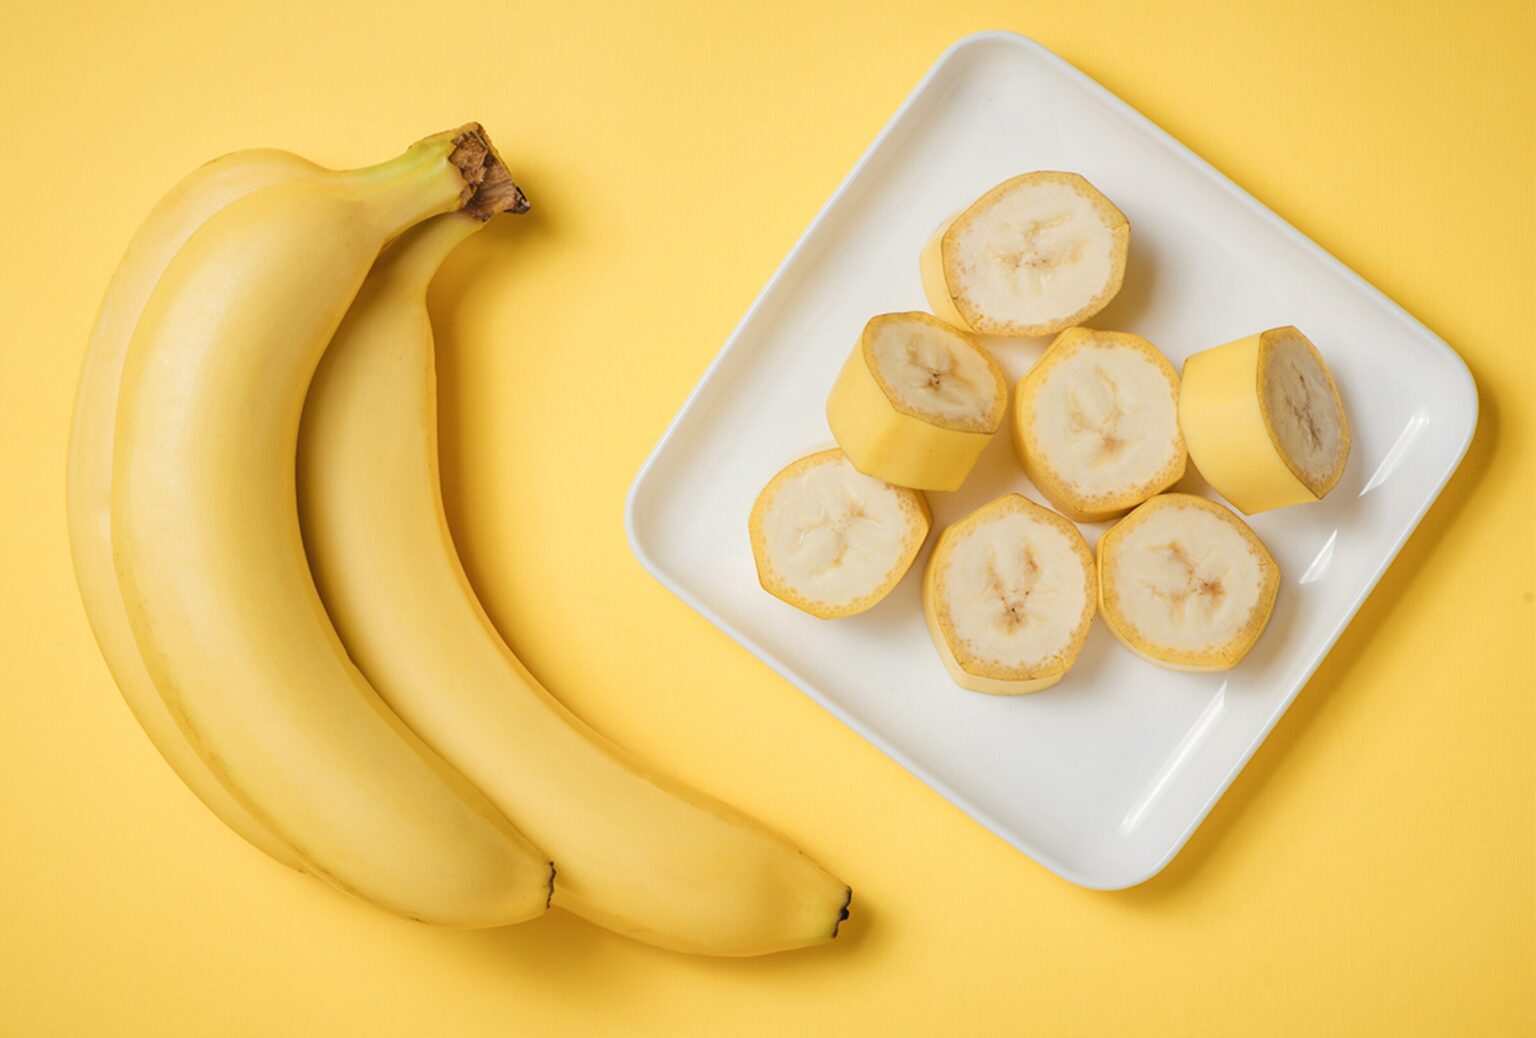 Have a craving for bananas? Looking to mix-match your meals and desserts? Seems like there are not enough recipes with bananas, so try these on for size!